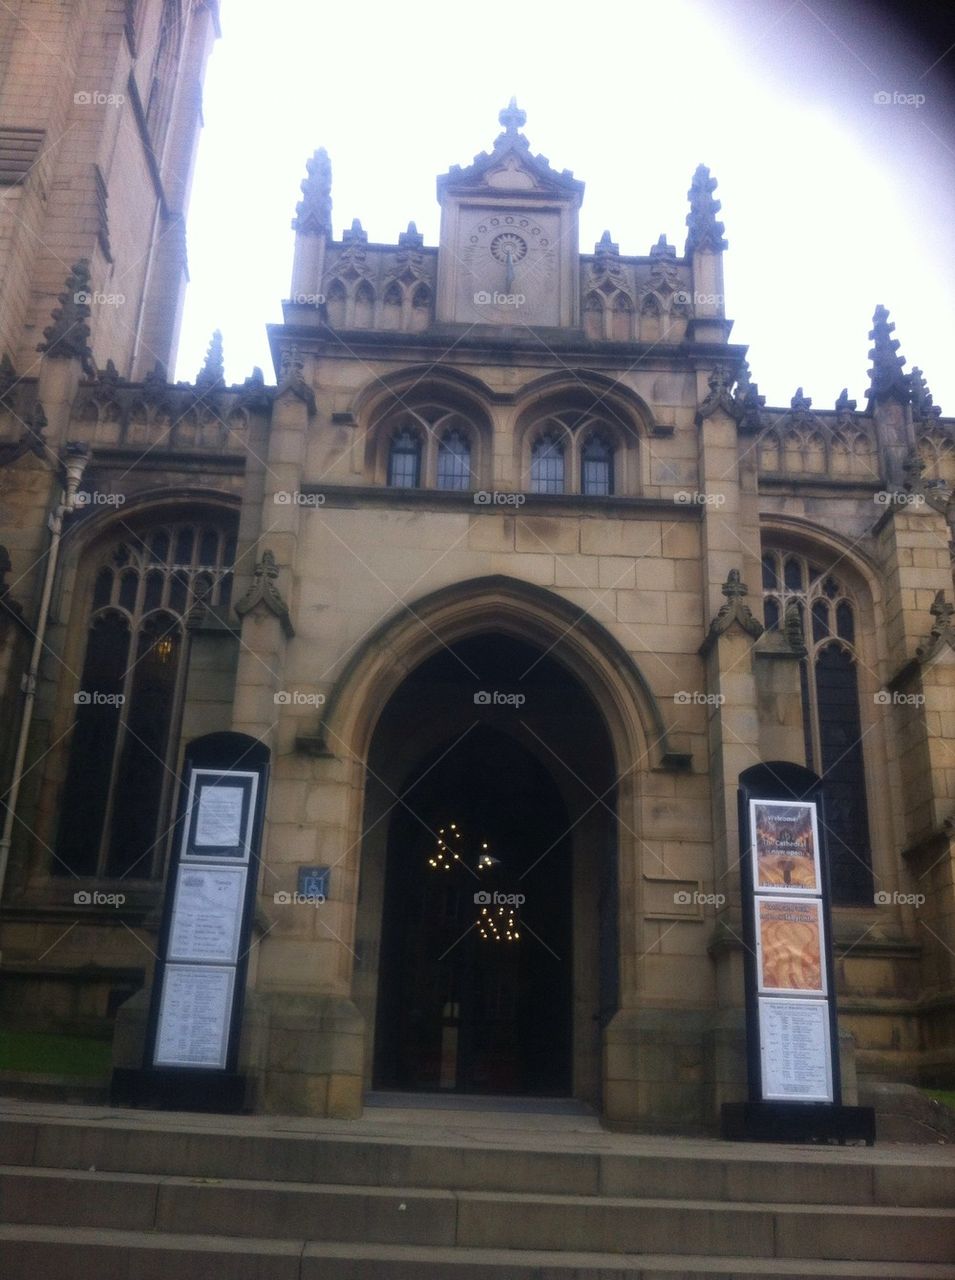 Entrance to Wakefield cathedral